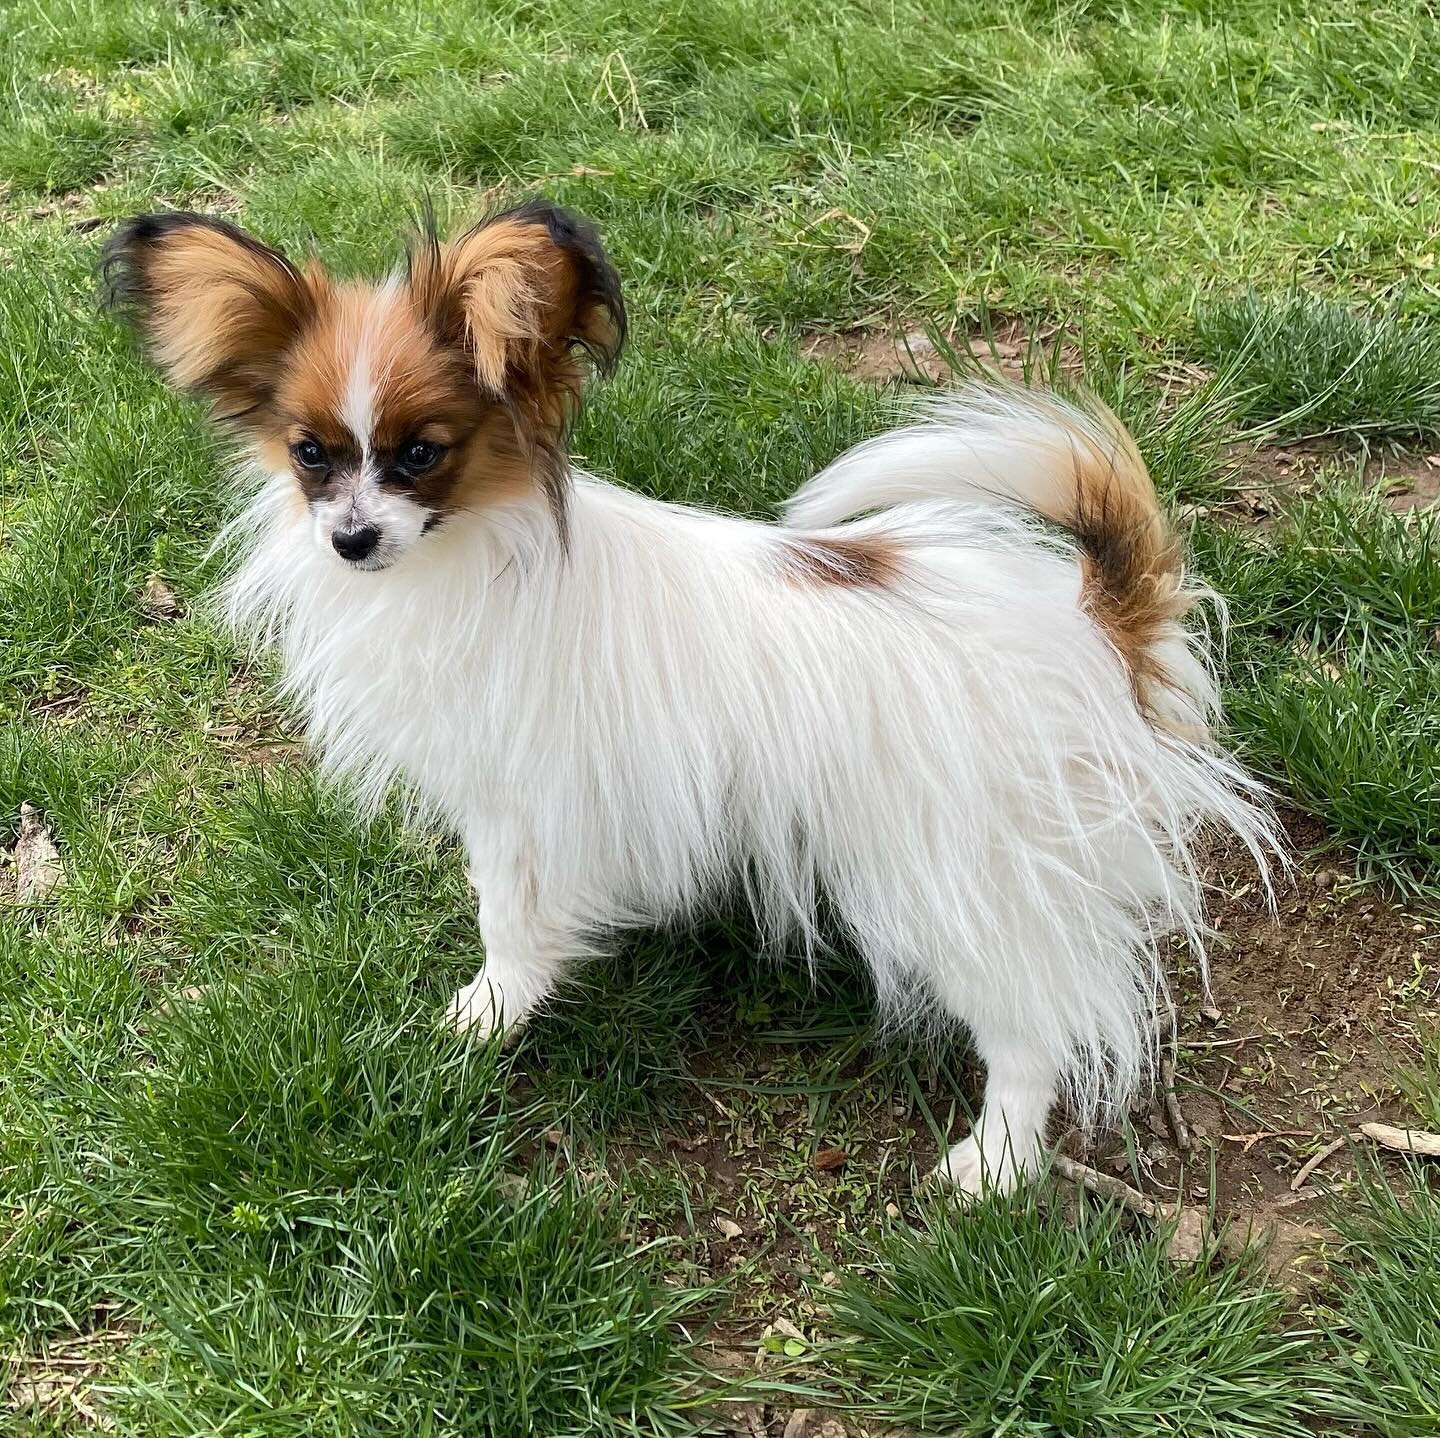 Nimue! Sunshine and Amarillo&rsquo;s daughter. 5 months old tomorrow #papillon #papillons #papillonsofinstagram #papillonlove #papillondog #papillonpuppy #puppylove #puppiesofinstagram #pupper #puppies #doggo #dogsofinstagram #sablewings